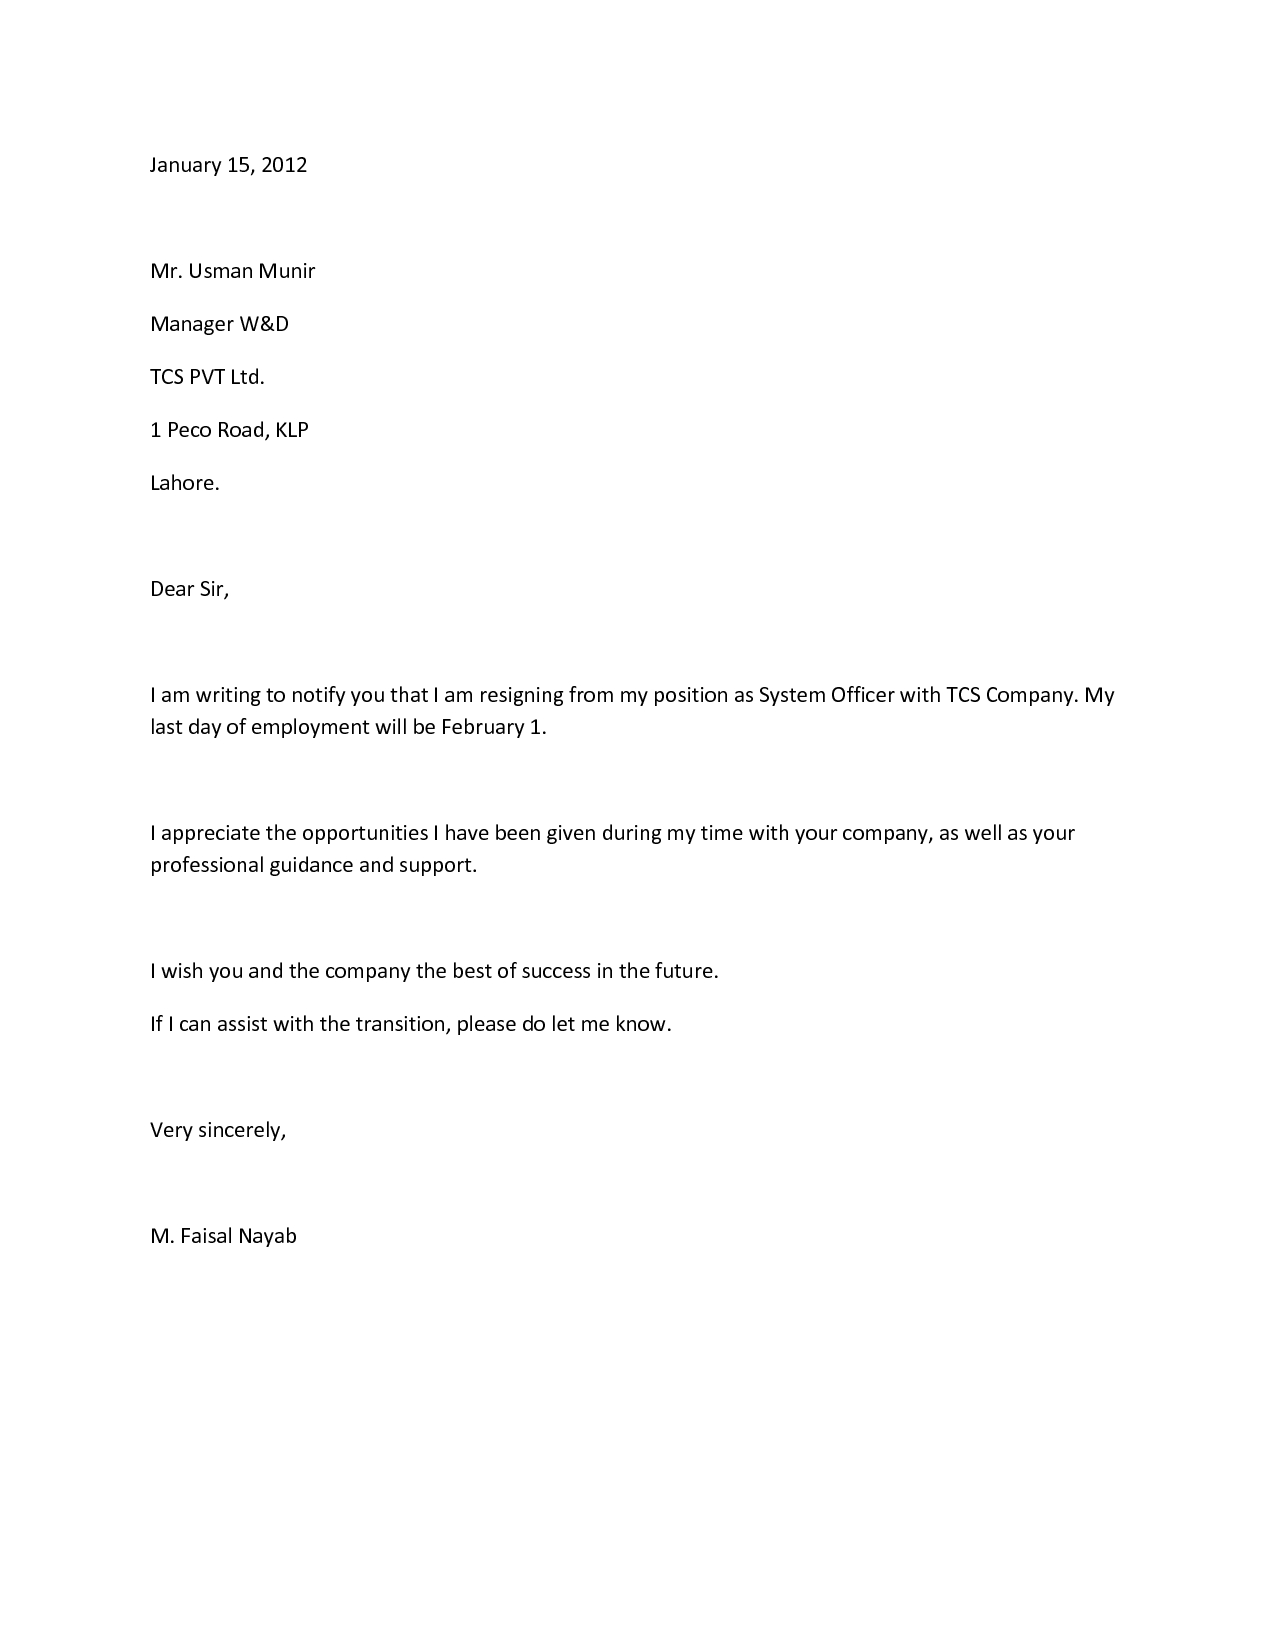 Resignation Letter Template Free Download - How to Write A Proper Resignation Letter Images